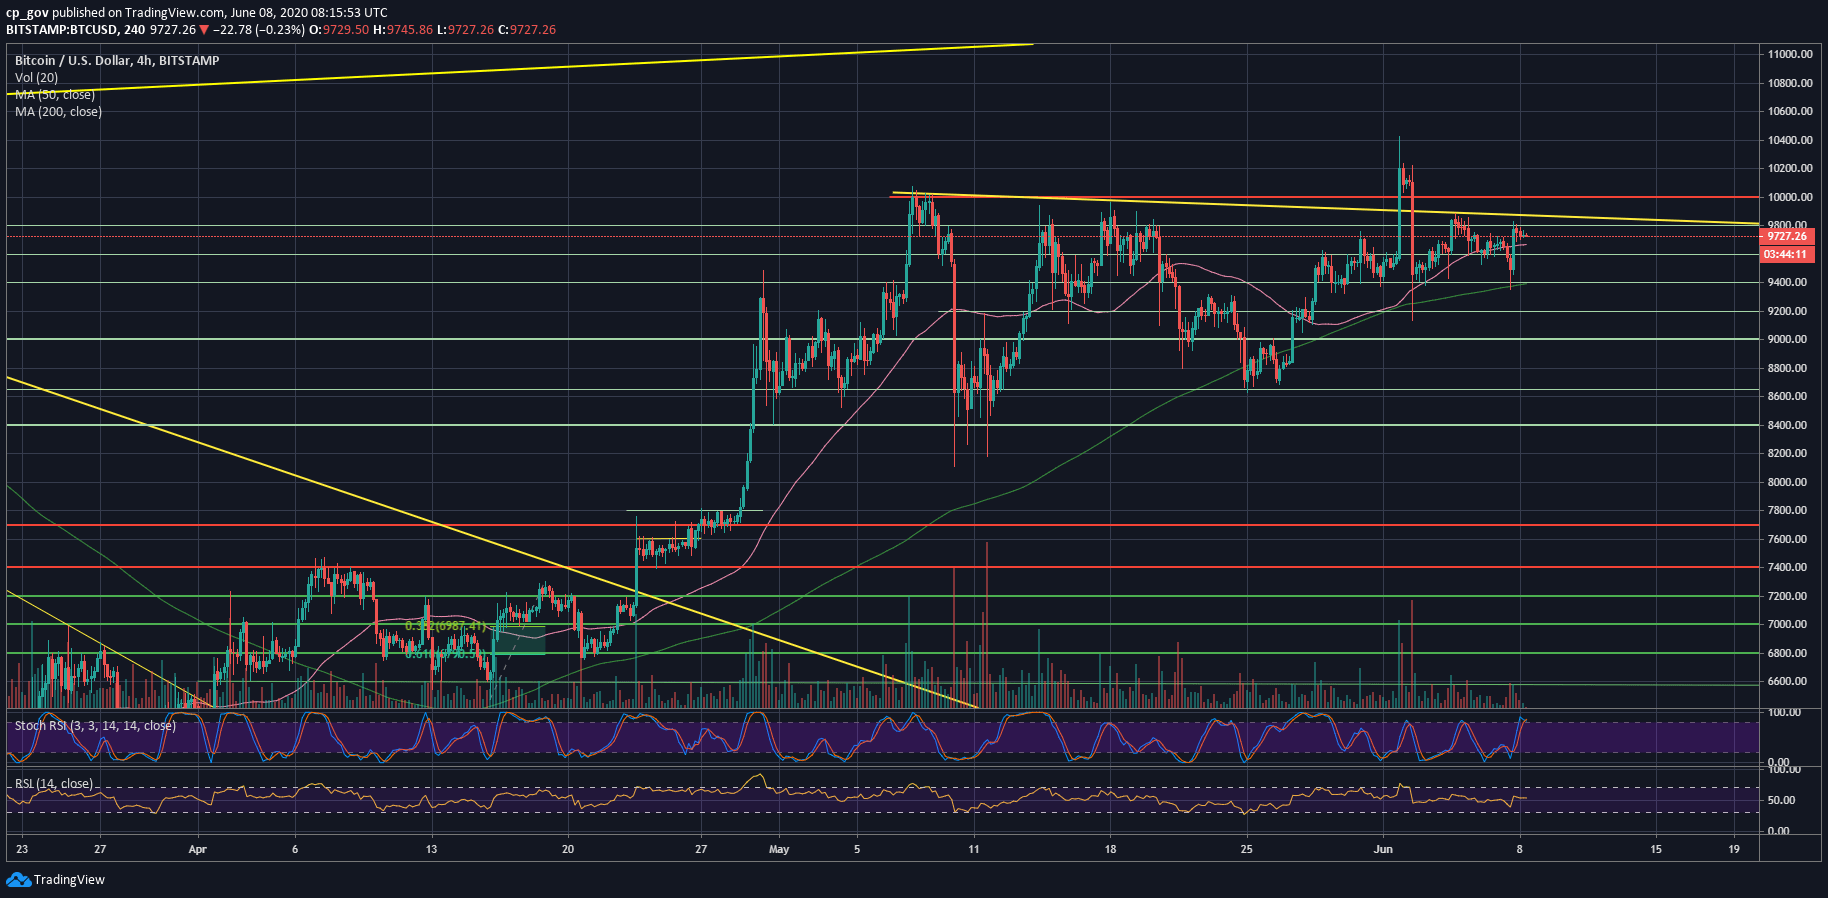 Bitcoin’s Crucial Week: Huge Price Move Anticipated As 2017-Weekly Trendline Comes To An End (BTC Analysis)